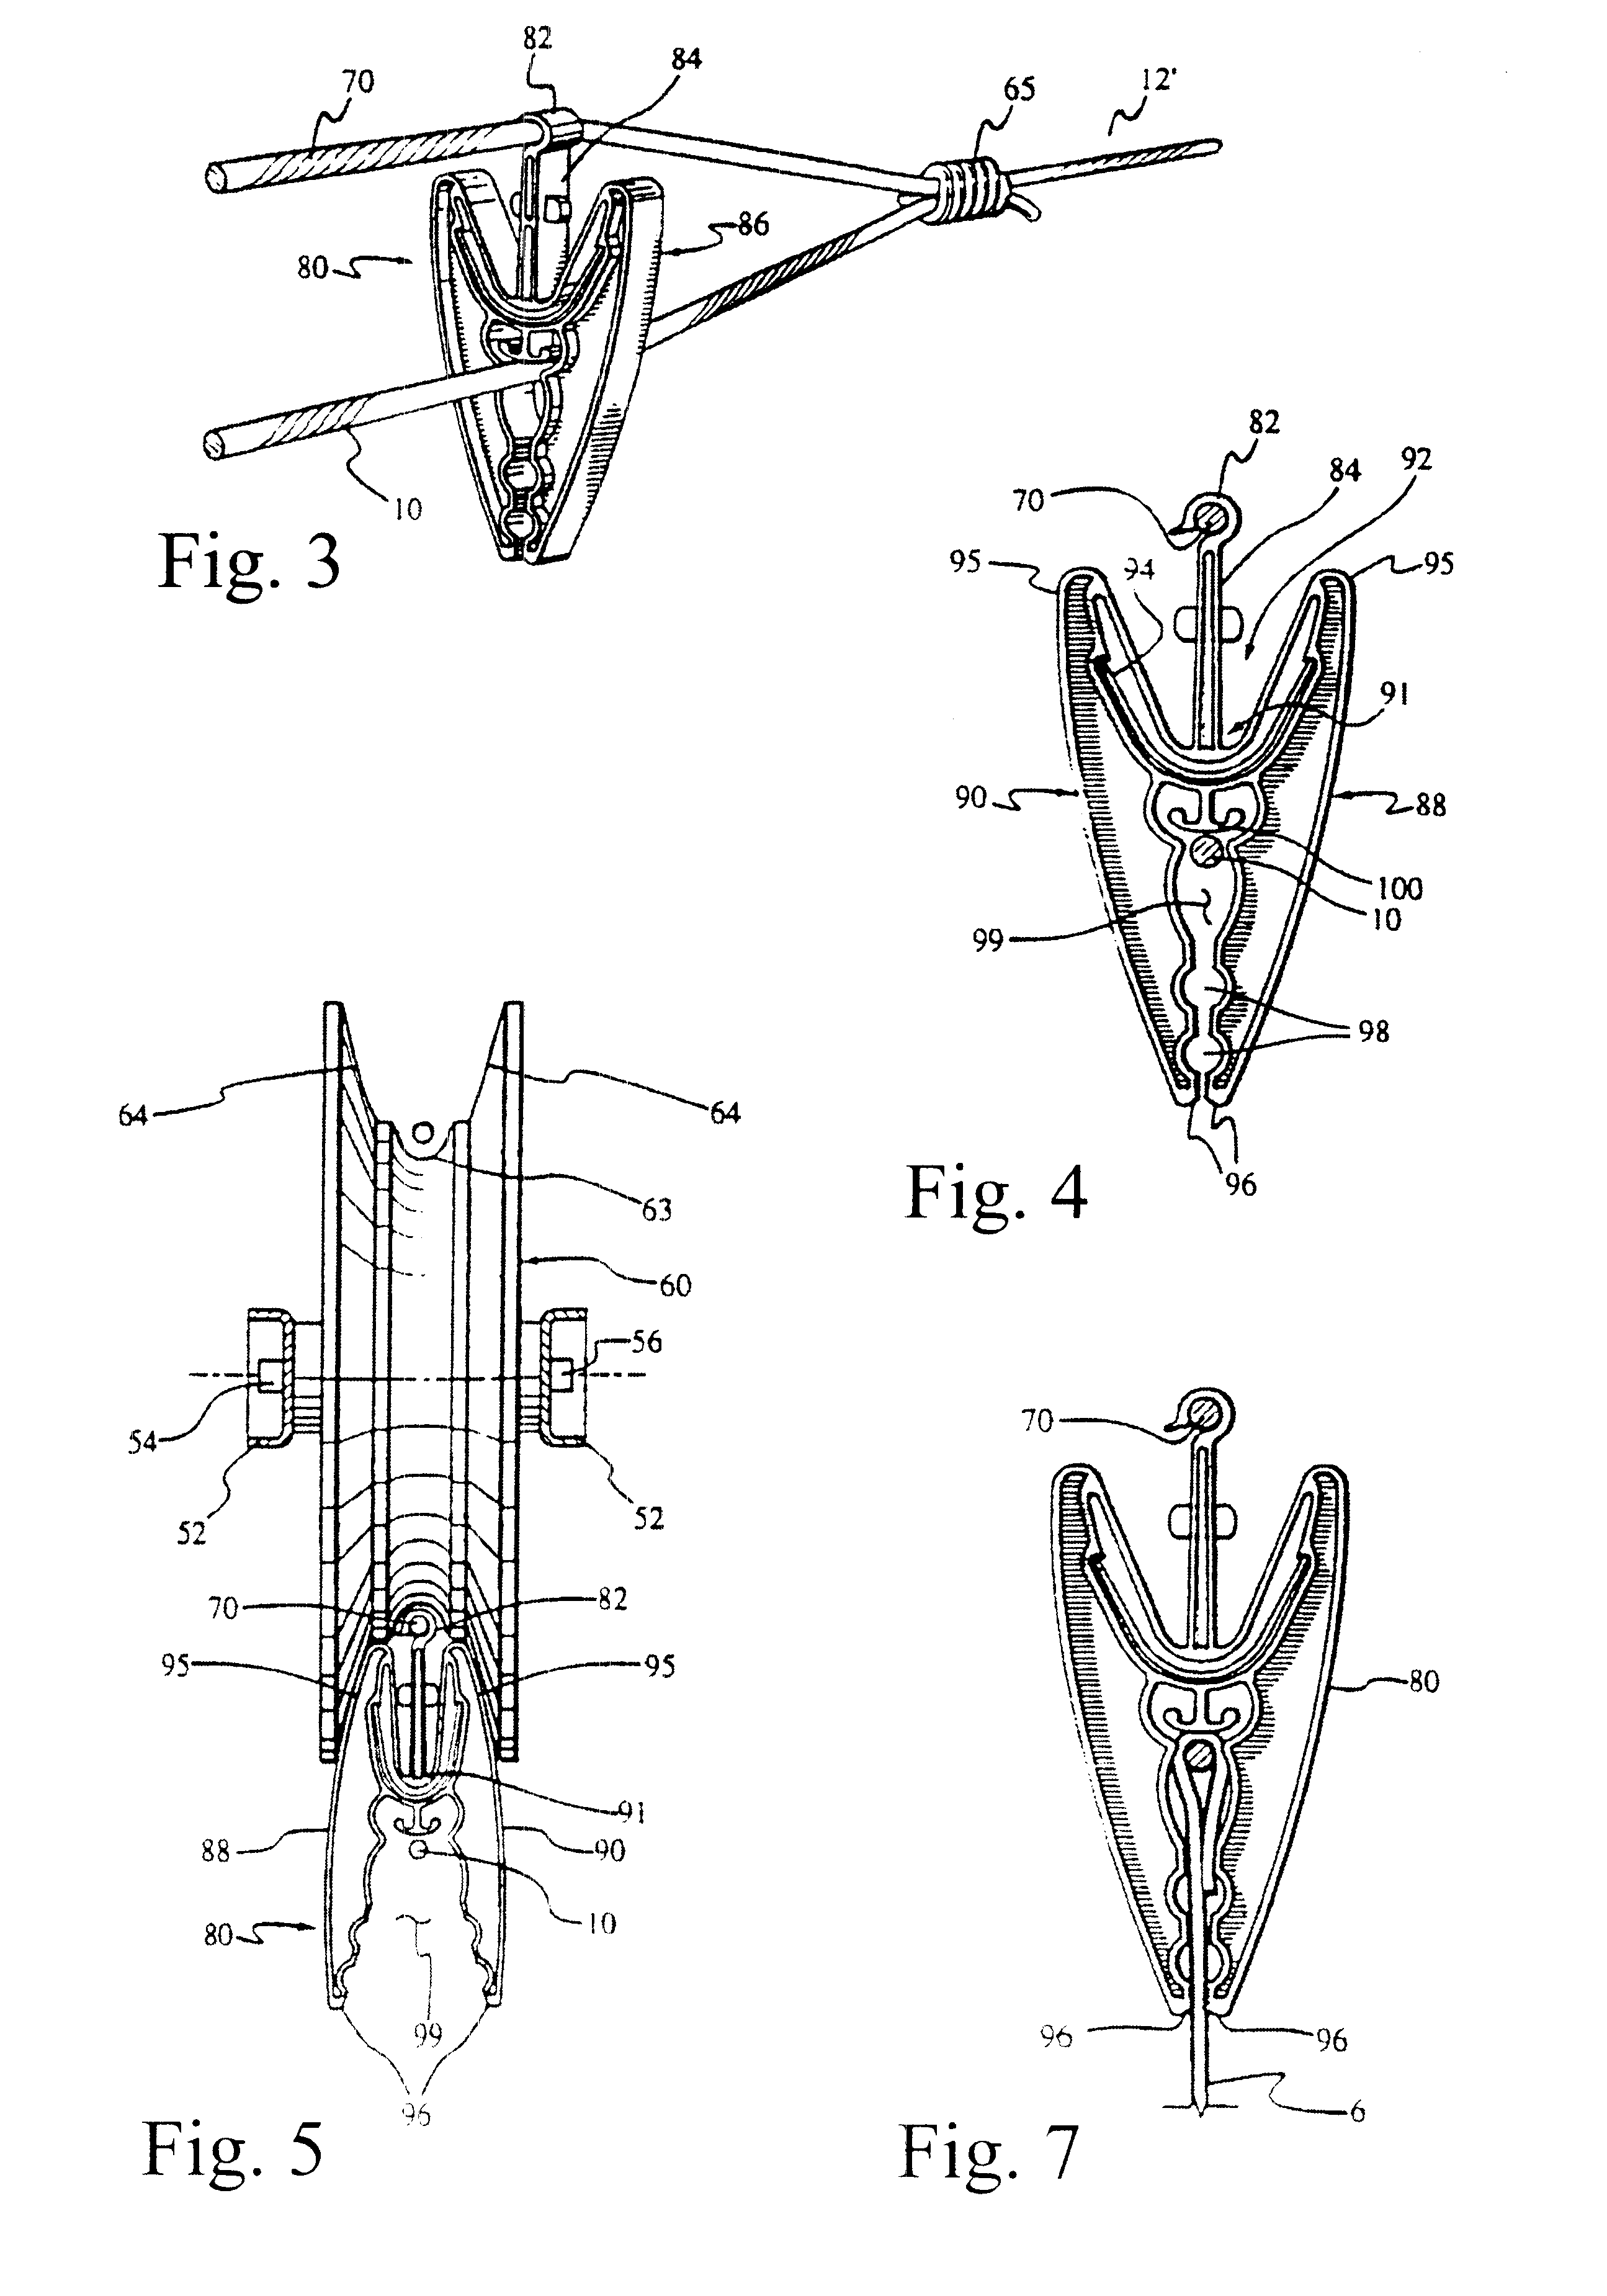 Clothesline system with a support system and improved clothespins